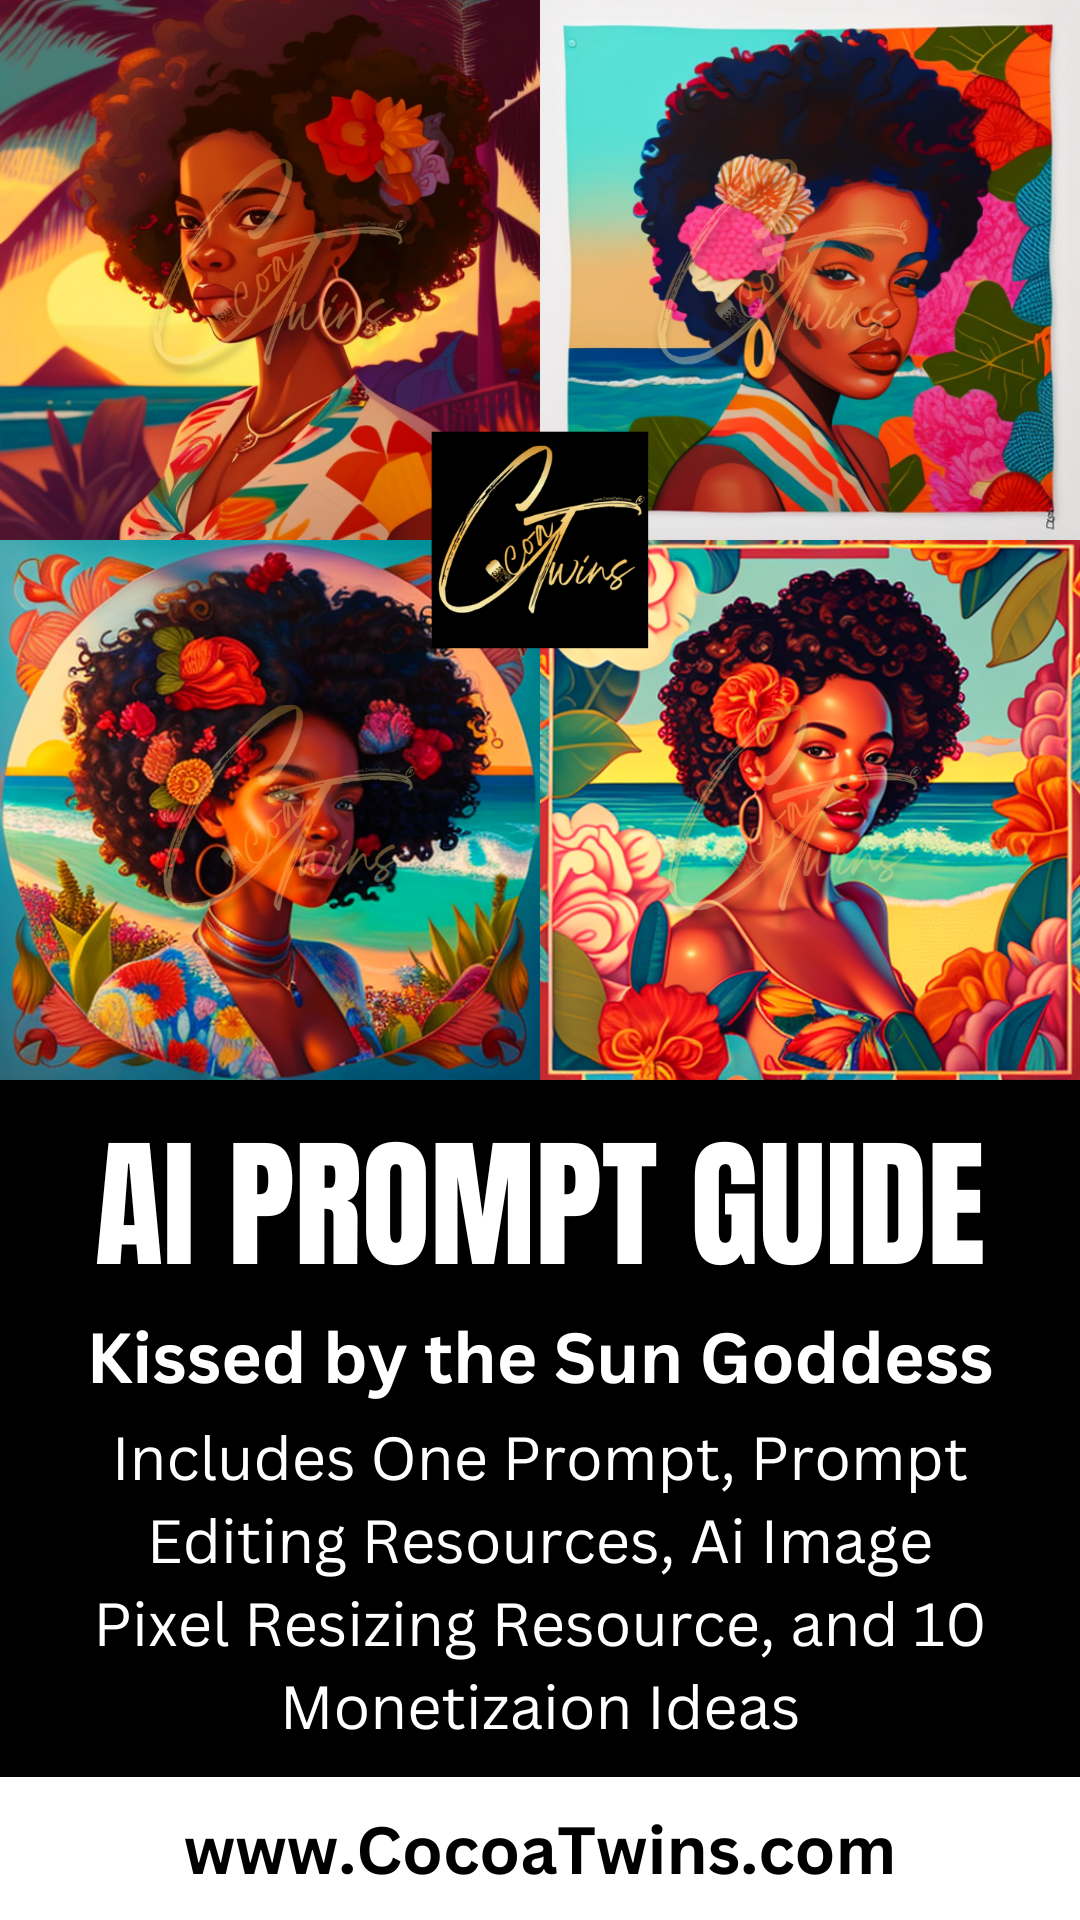 Single MidJourney Prompt Guide -  Kissed by the Sun Goddess